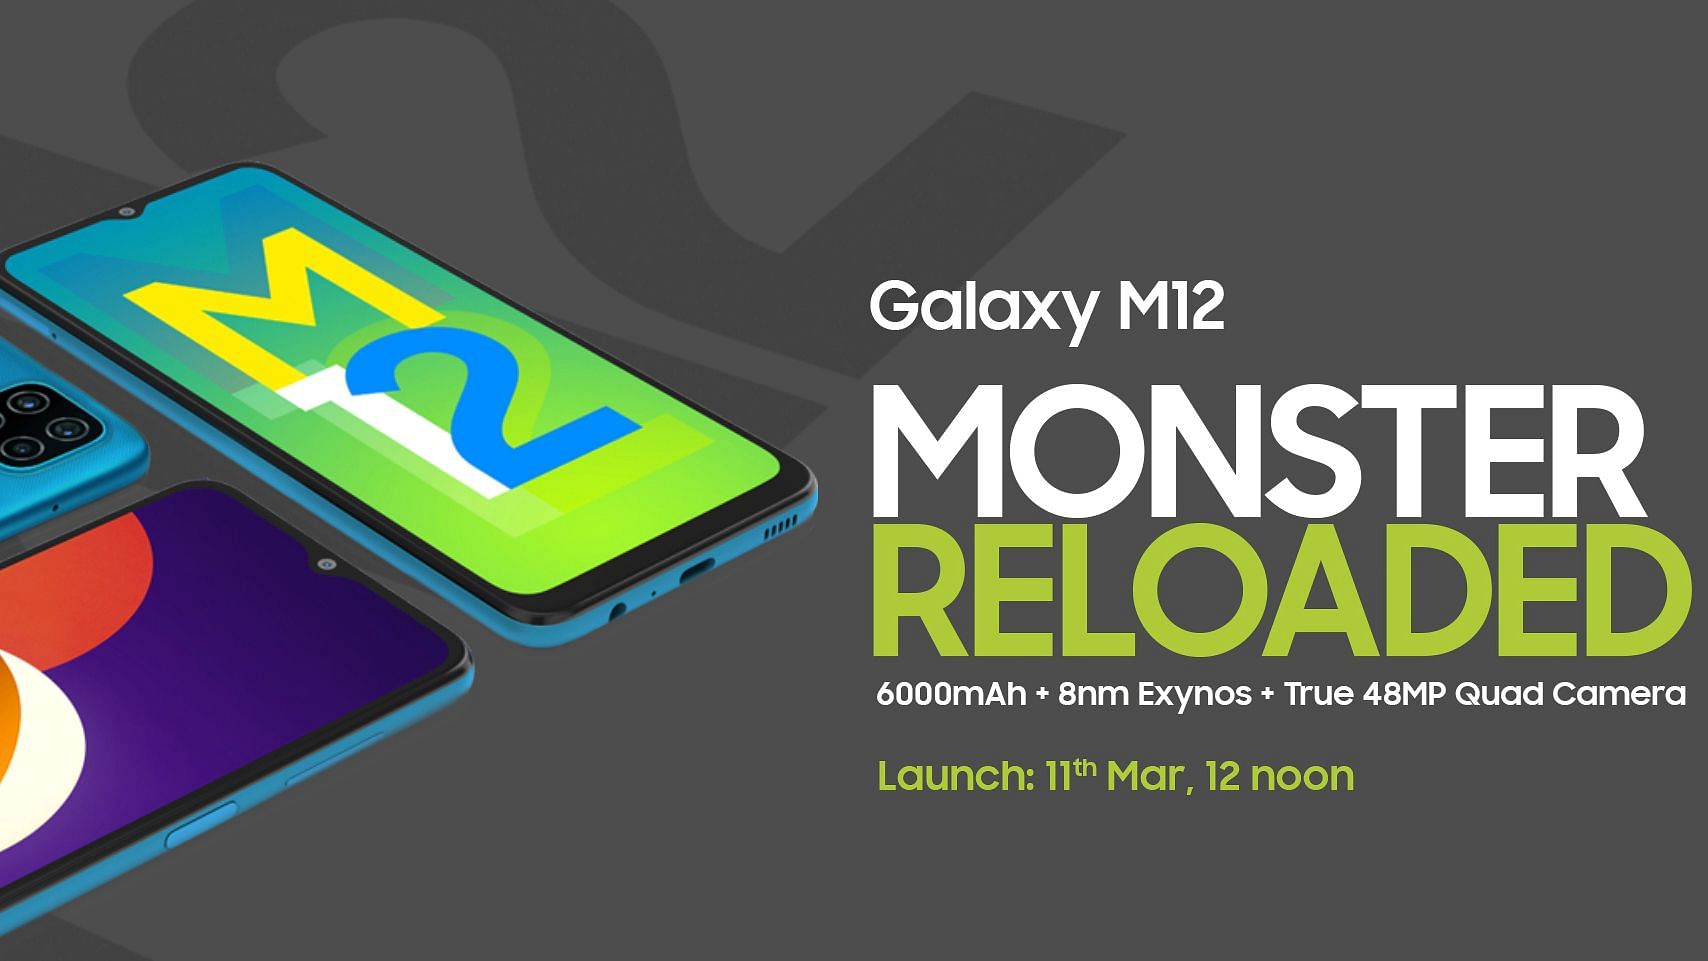 Samsung Galaxy M12 will launch on 11 March 2021, at 12 noon.